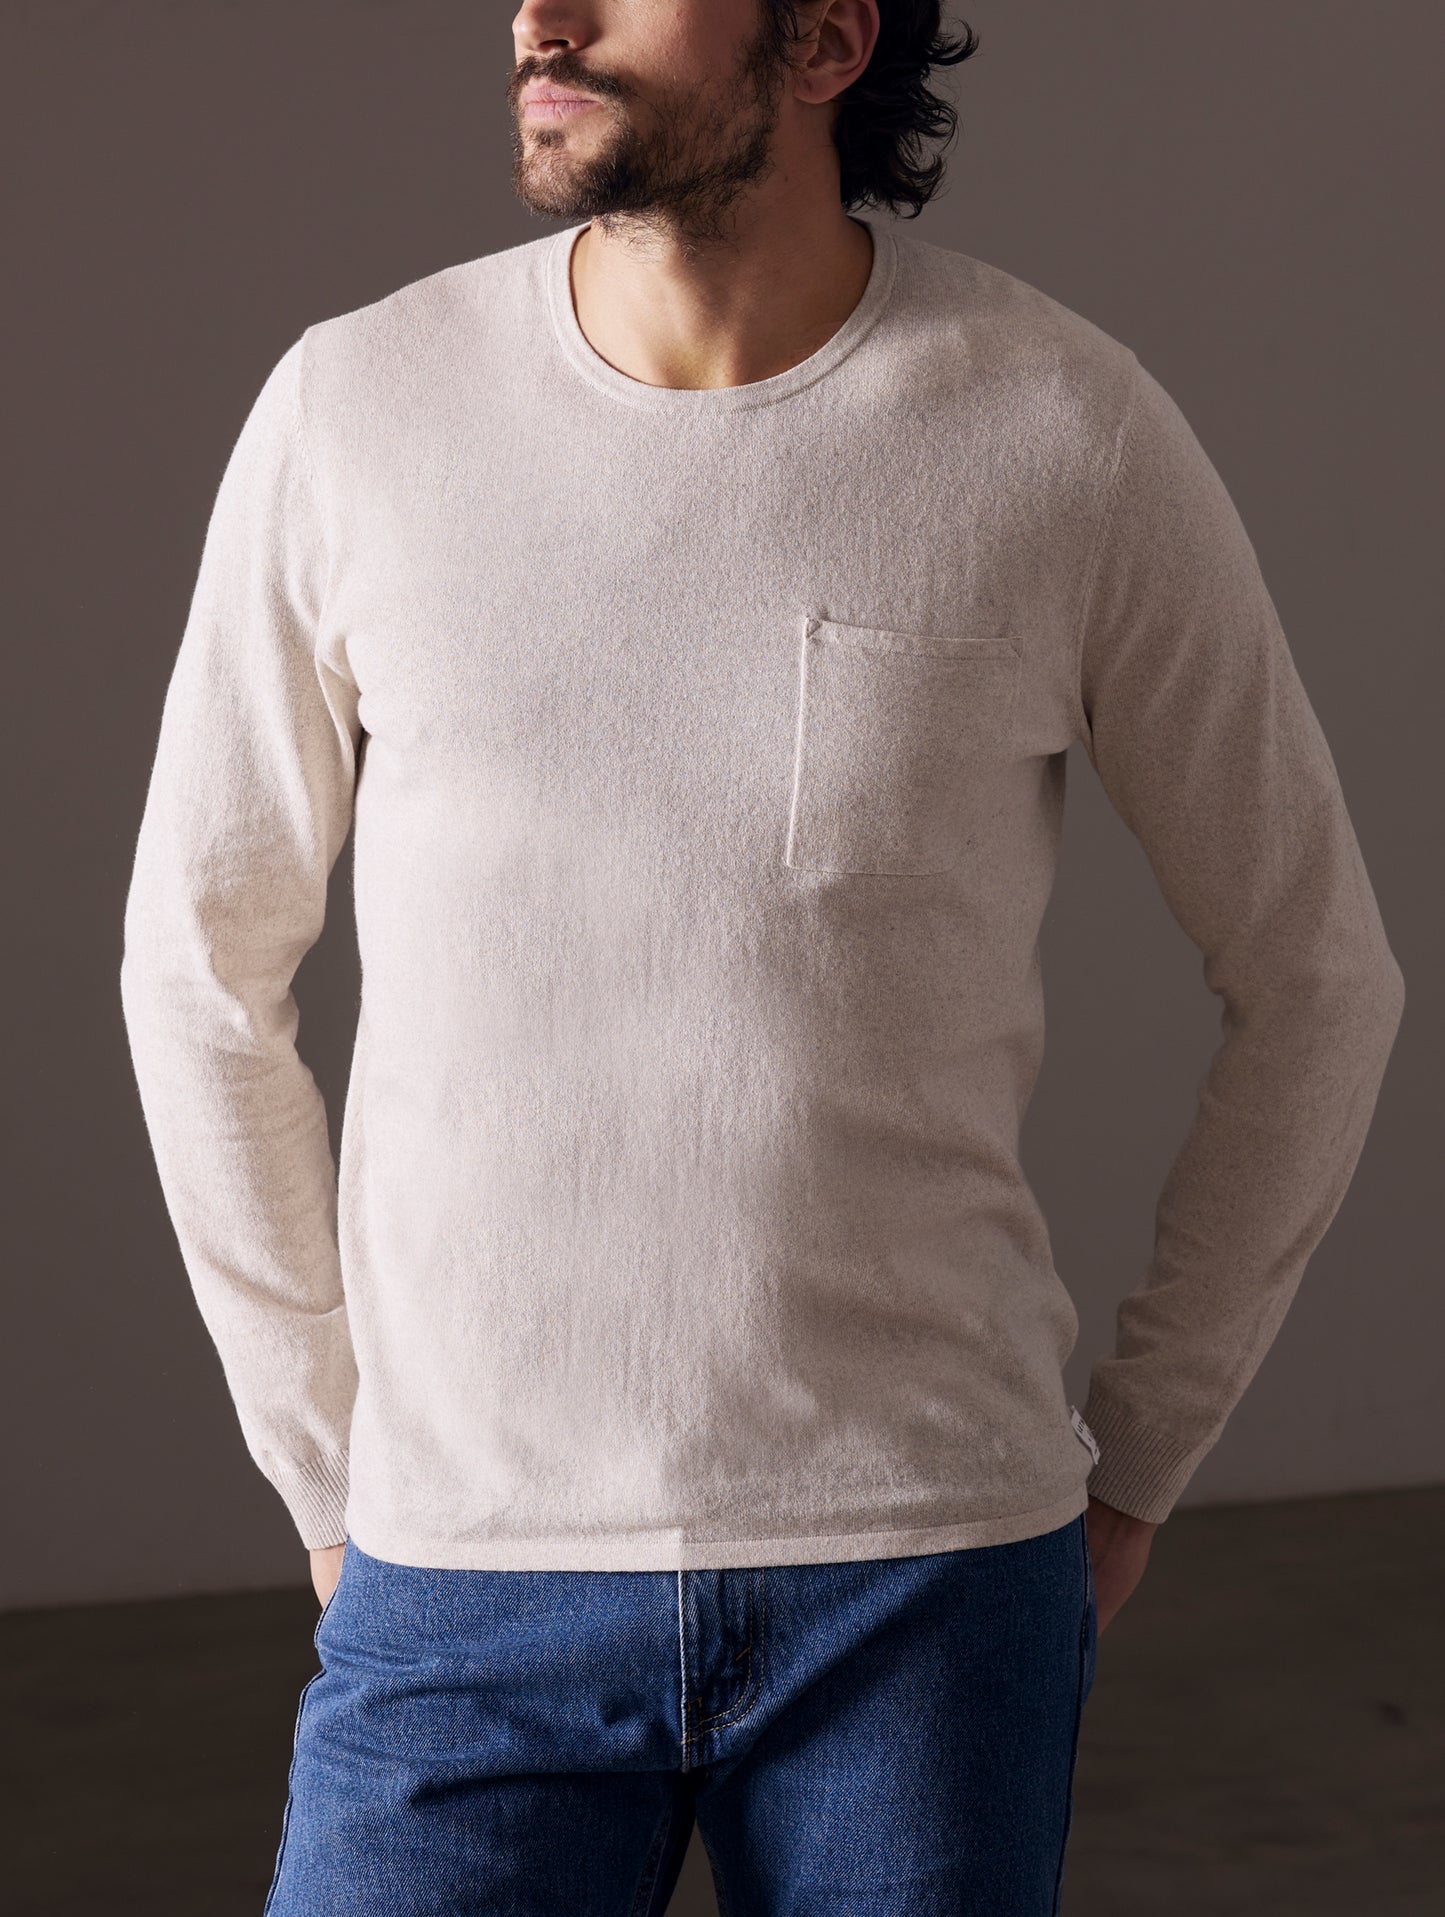 Man wearing light tan sweater from AETHER Apparel